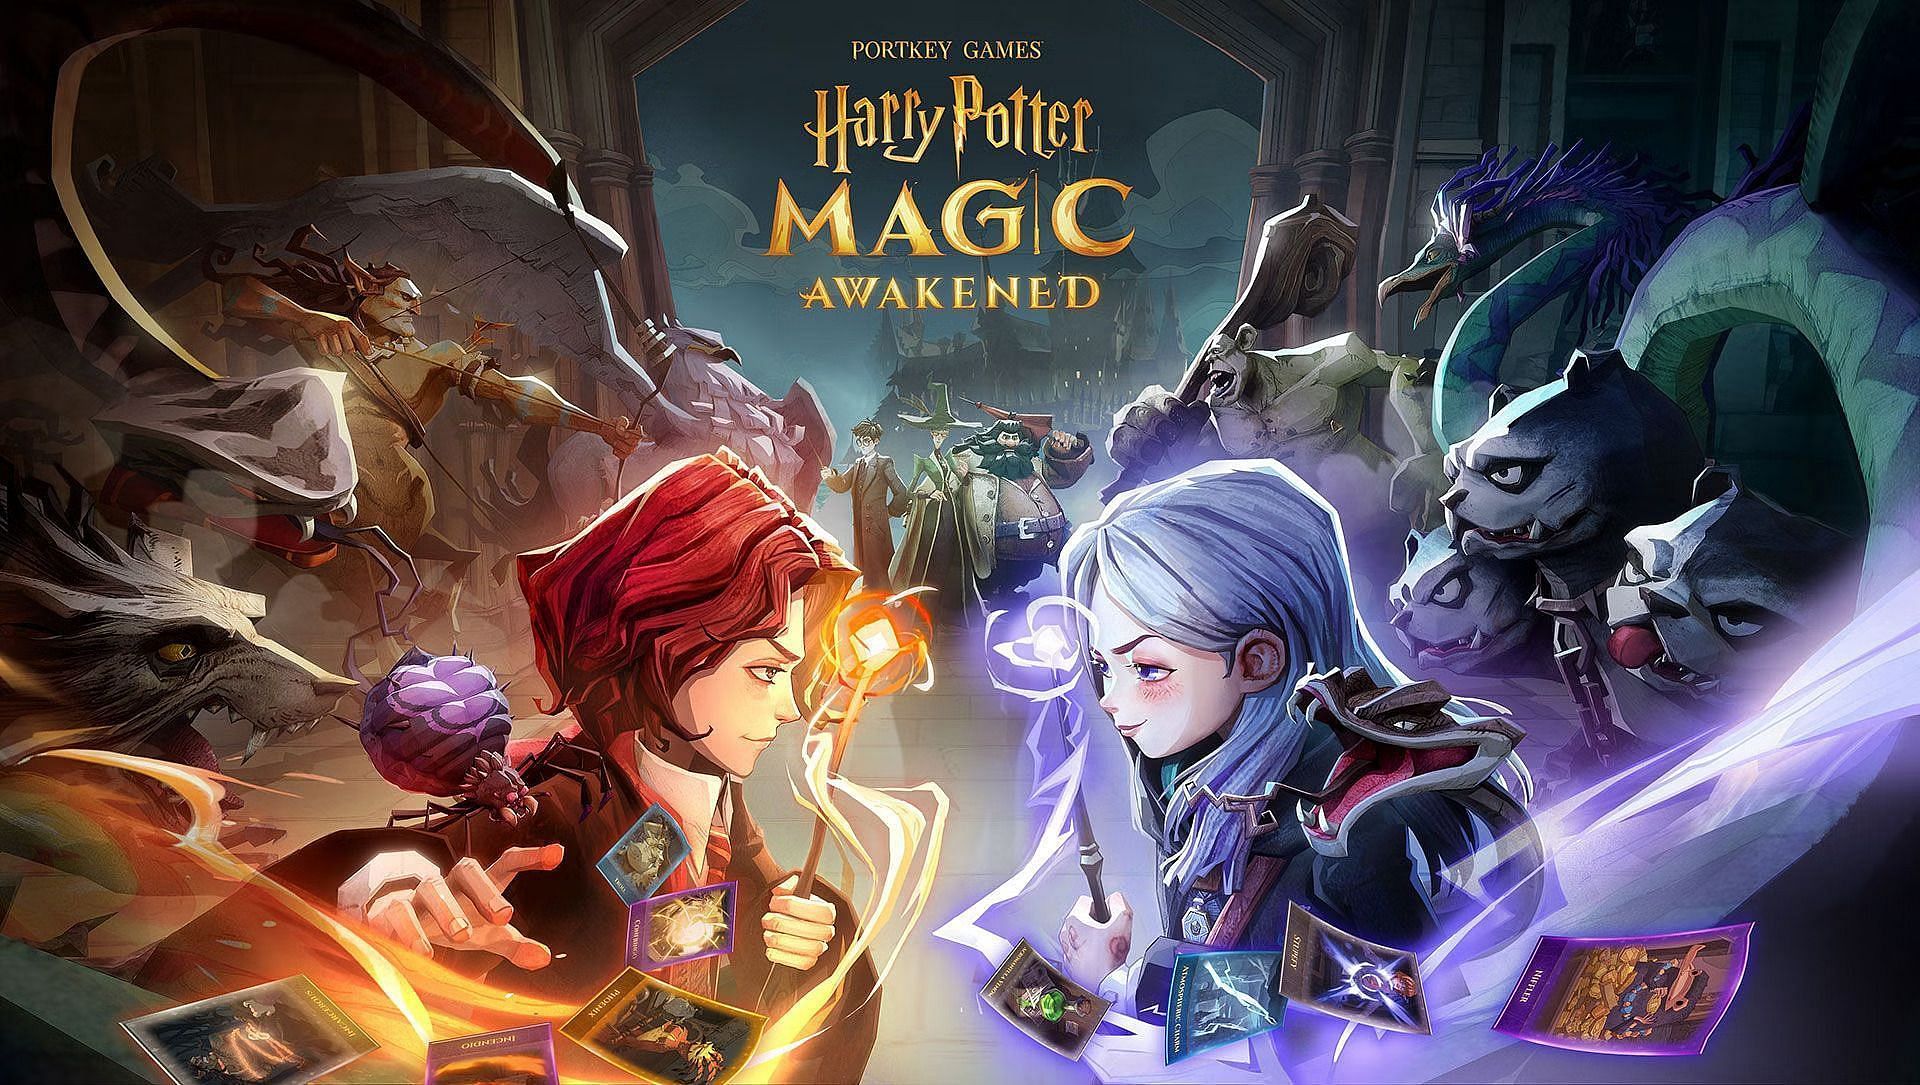 Two in game characters posing against each other with Hagrid and Harry Potter in the background. 